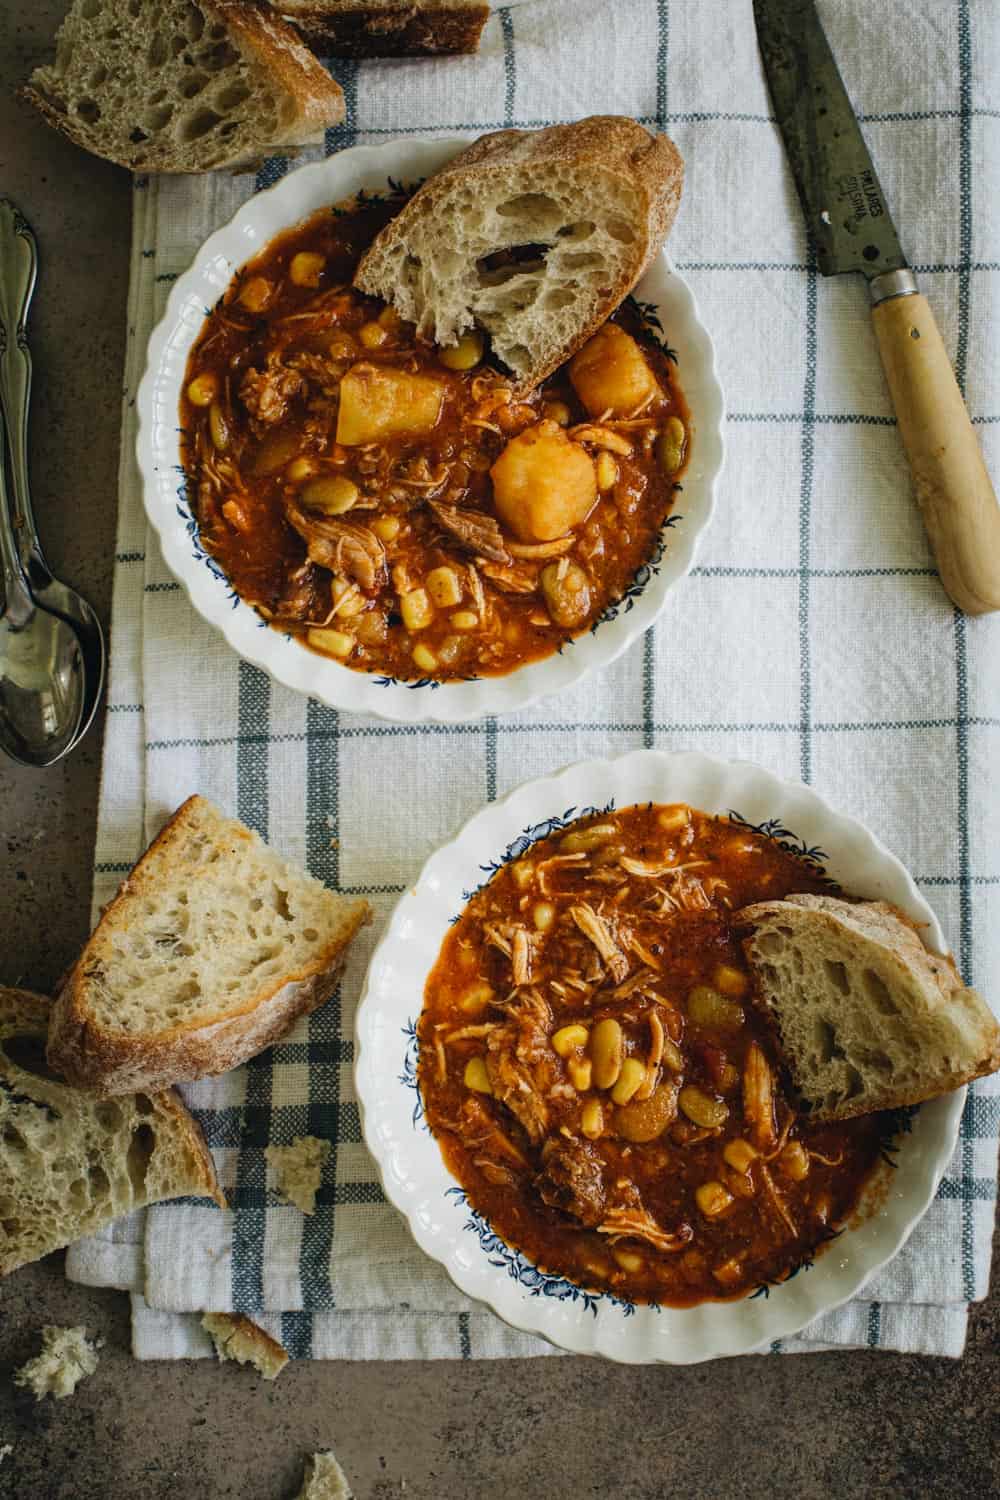 Two bowls of Alabama Camp Stew with bread slices on a white and blue checked towel.